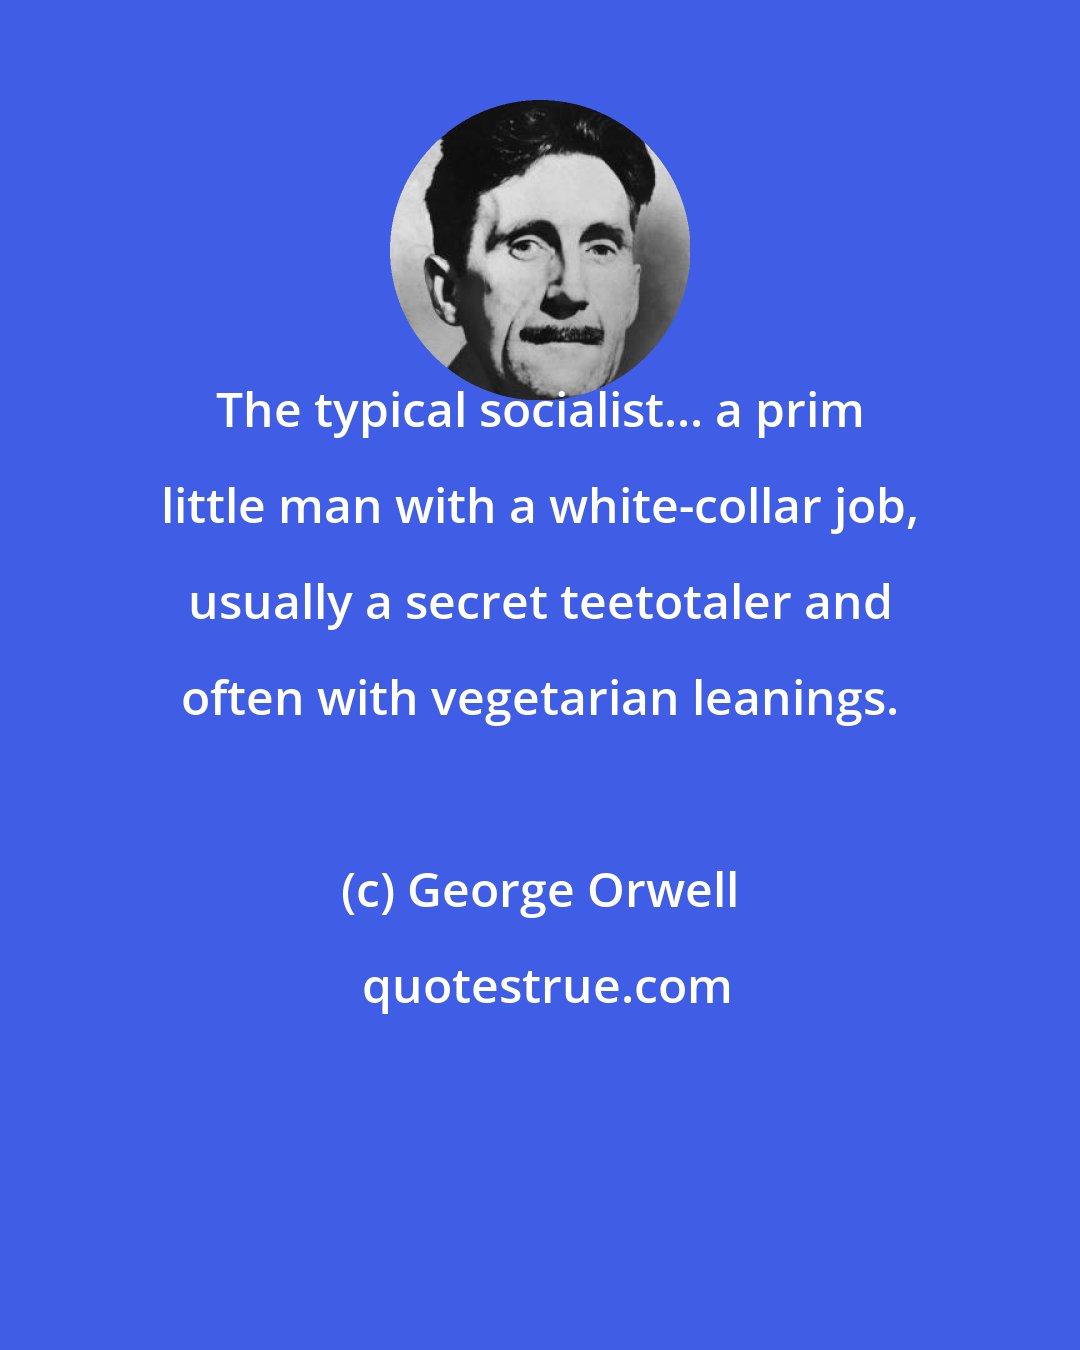 George Orwell: The typical socialist... a prim little man with a white-collar job, usually a secret teetotaler and often with vegetarian leanings.